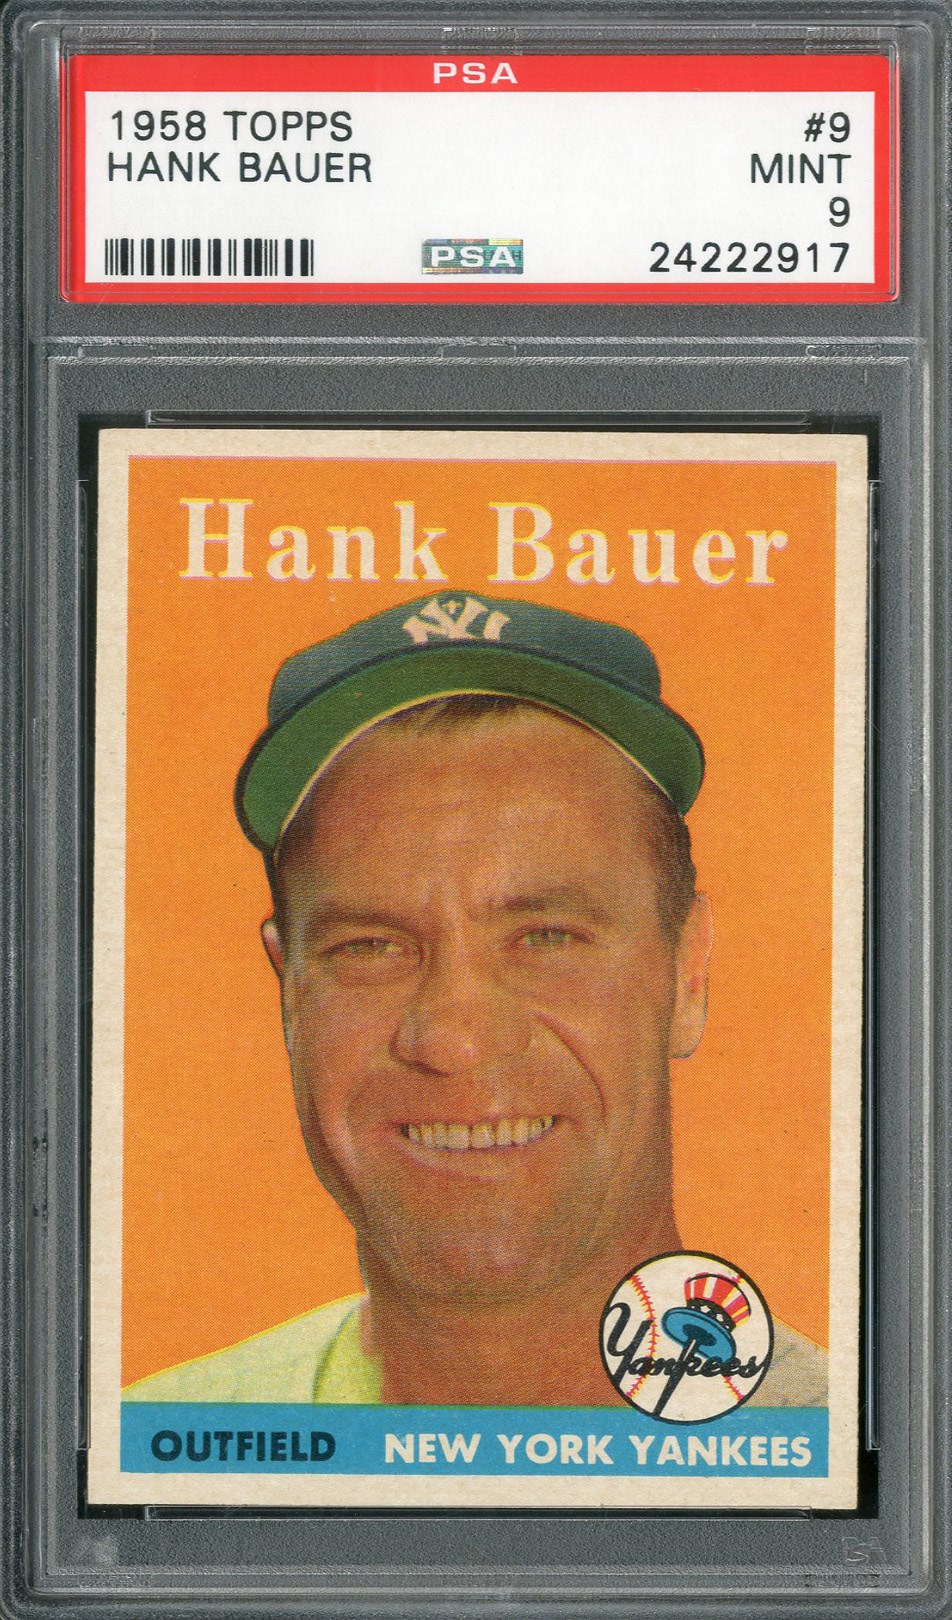 Baseball and Trading Cards - 1958 Topps #9 Hank Bauer PSA MINT 9